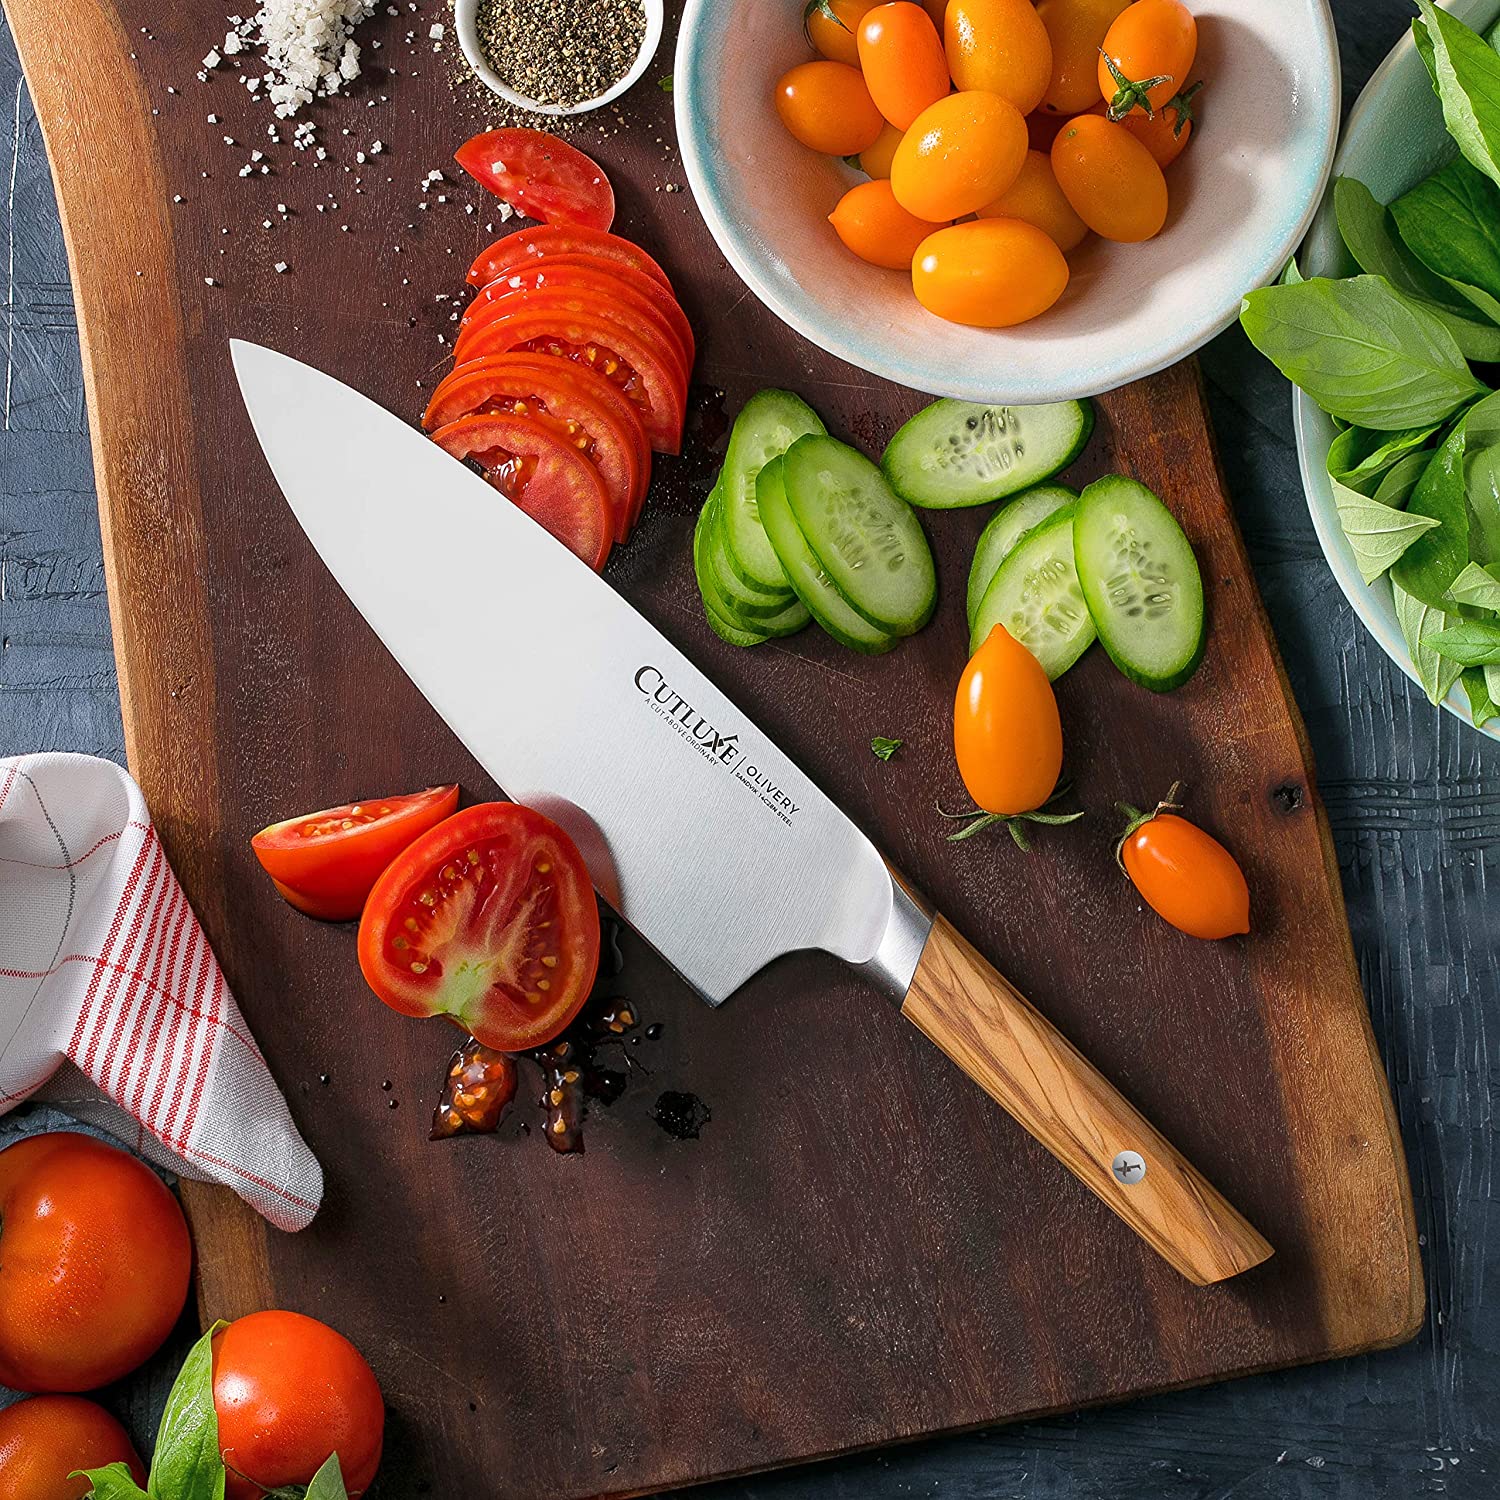  OAKSWARE Chef Knife, 6 Cutting & Cooking Kitchen